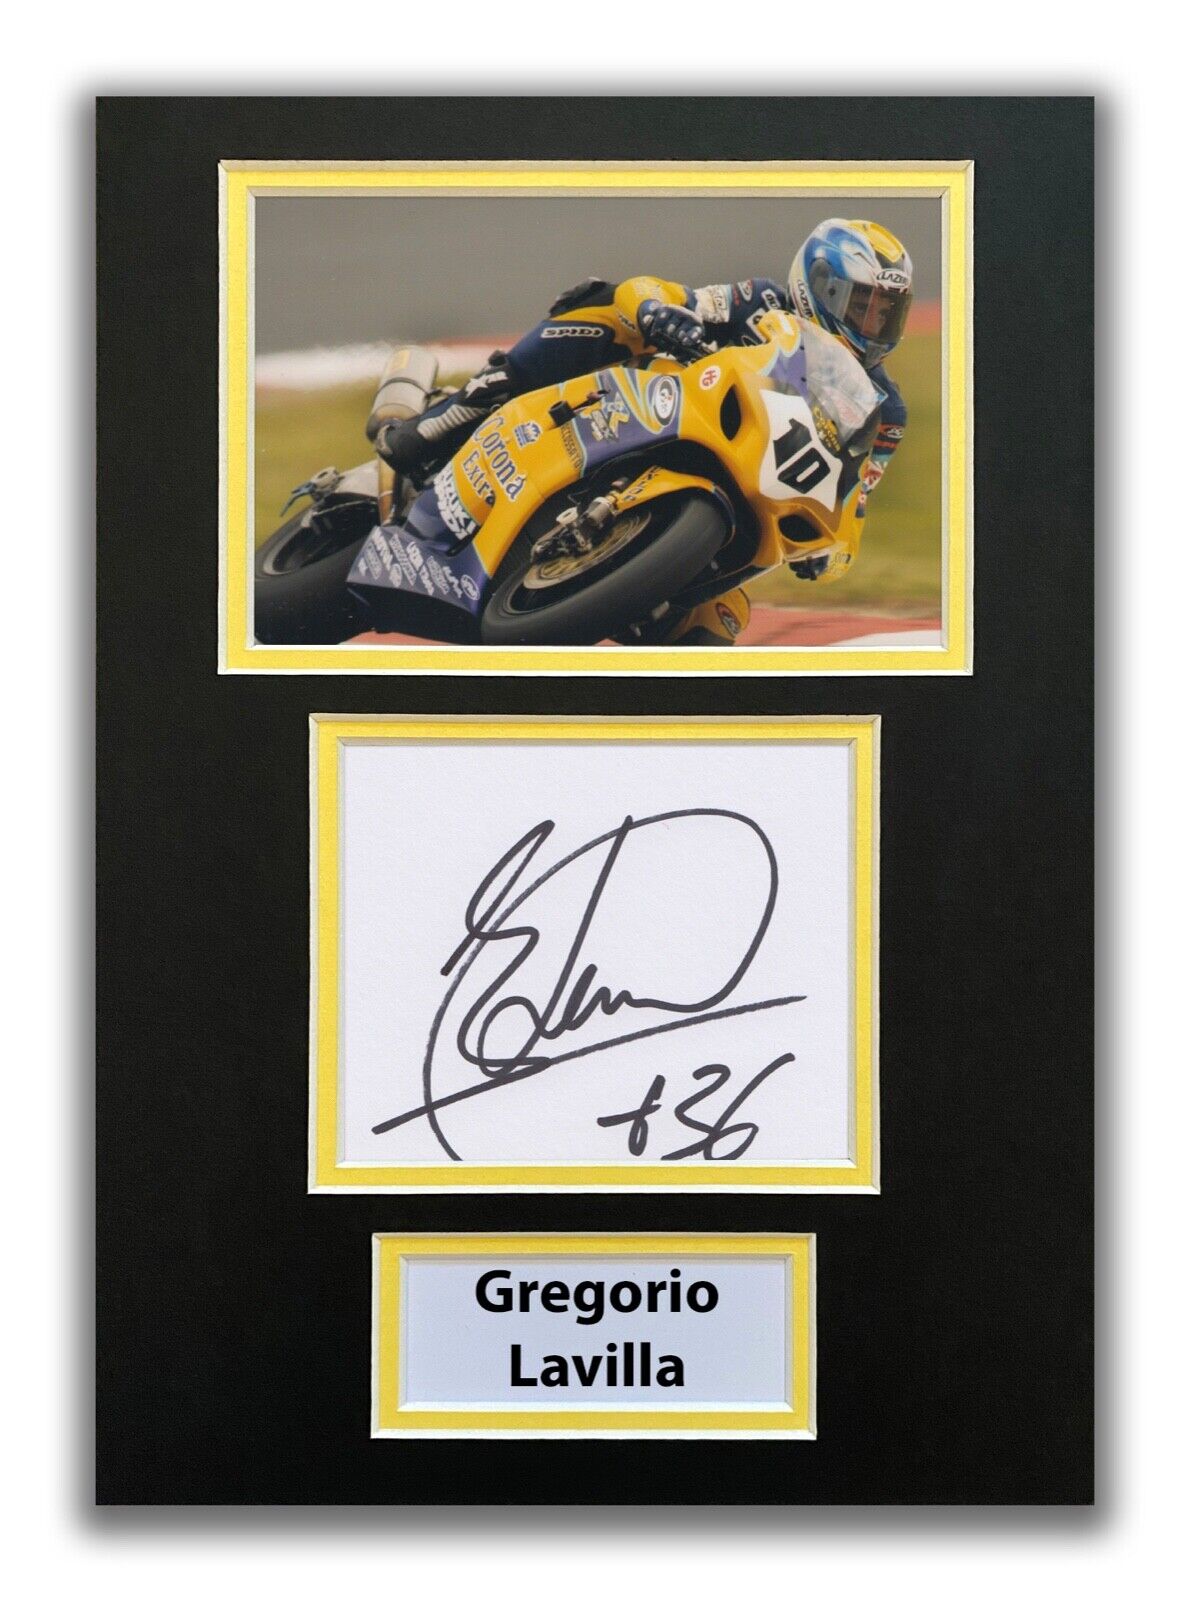 GREGORIO LAVILLA HAND SIGNED A4 MOUNTED Photo Poster painting DISPLAY - WSBK - AUTOGRAPH - BSB 1